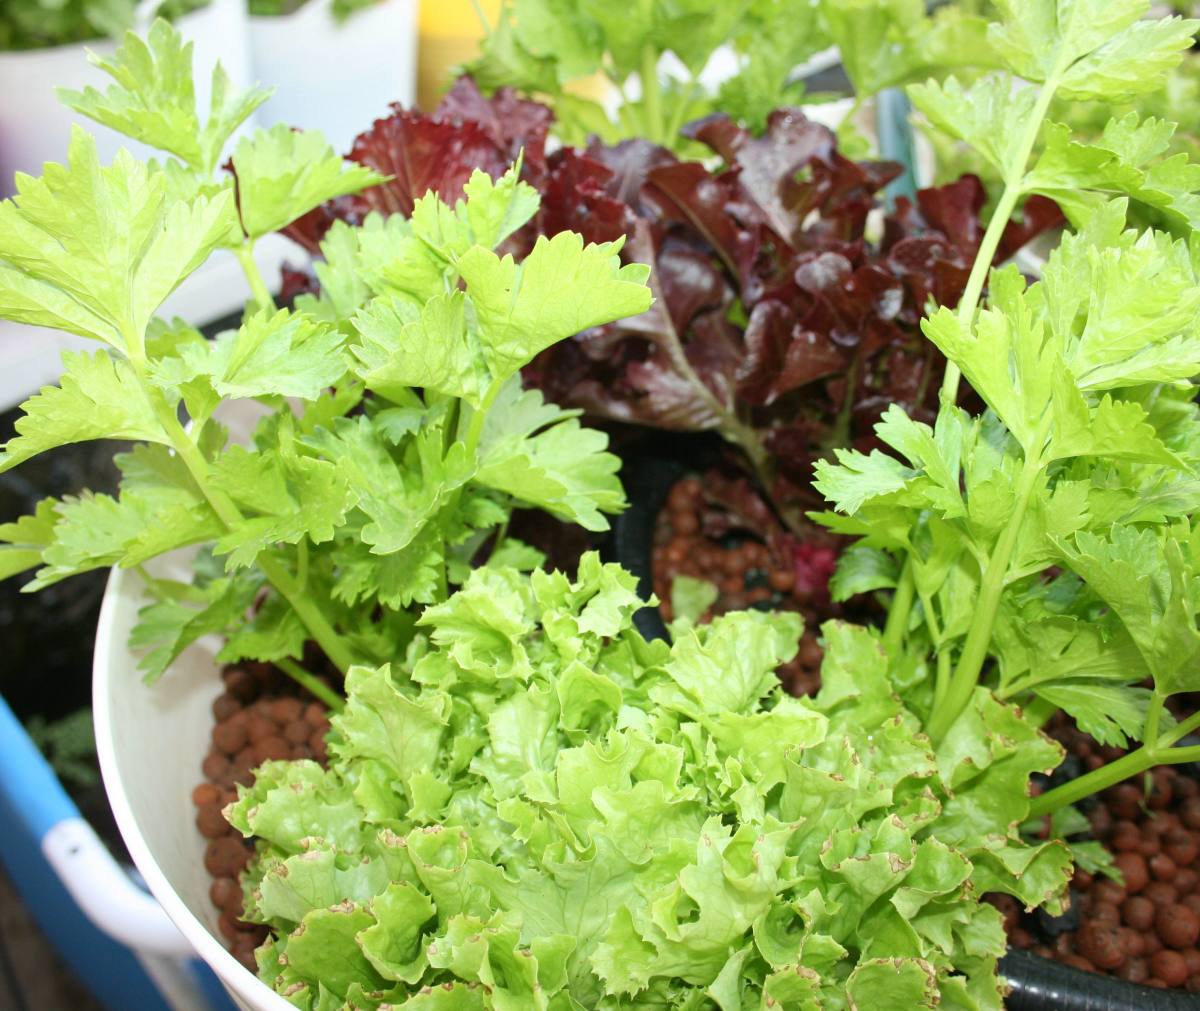 Leafy greens thrive in aquaponics systems.